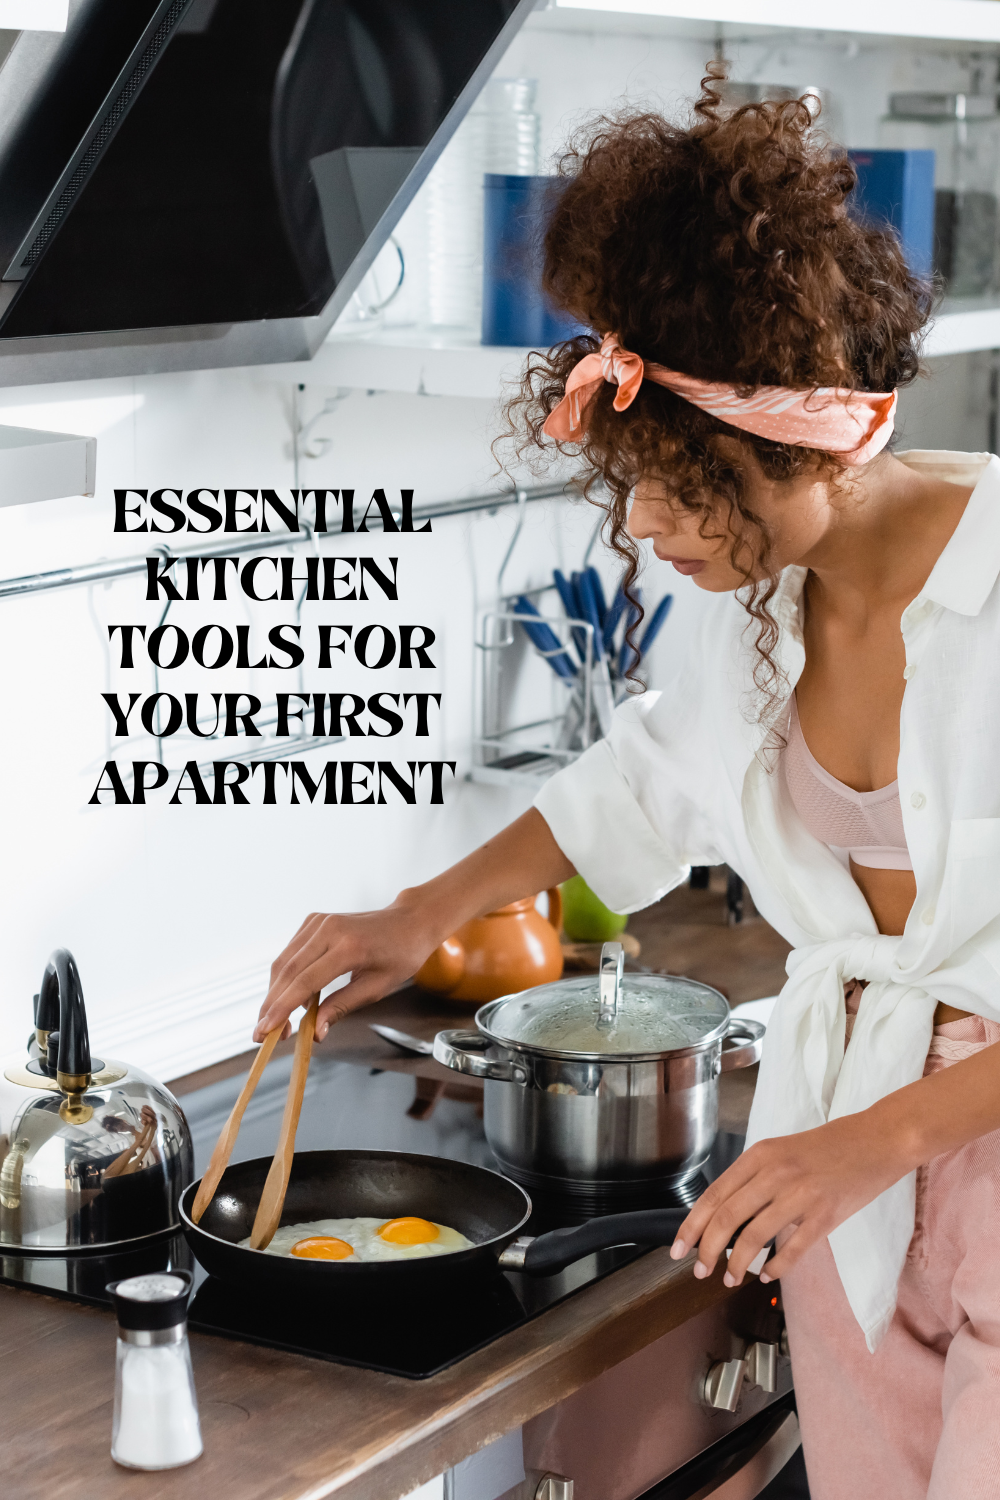 Essential Kitchen Appliances for Your First Apartment